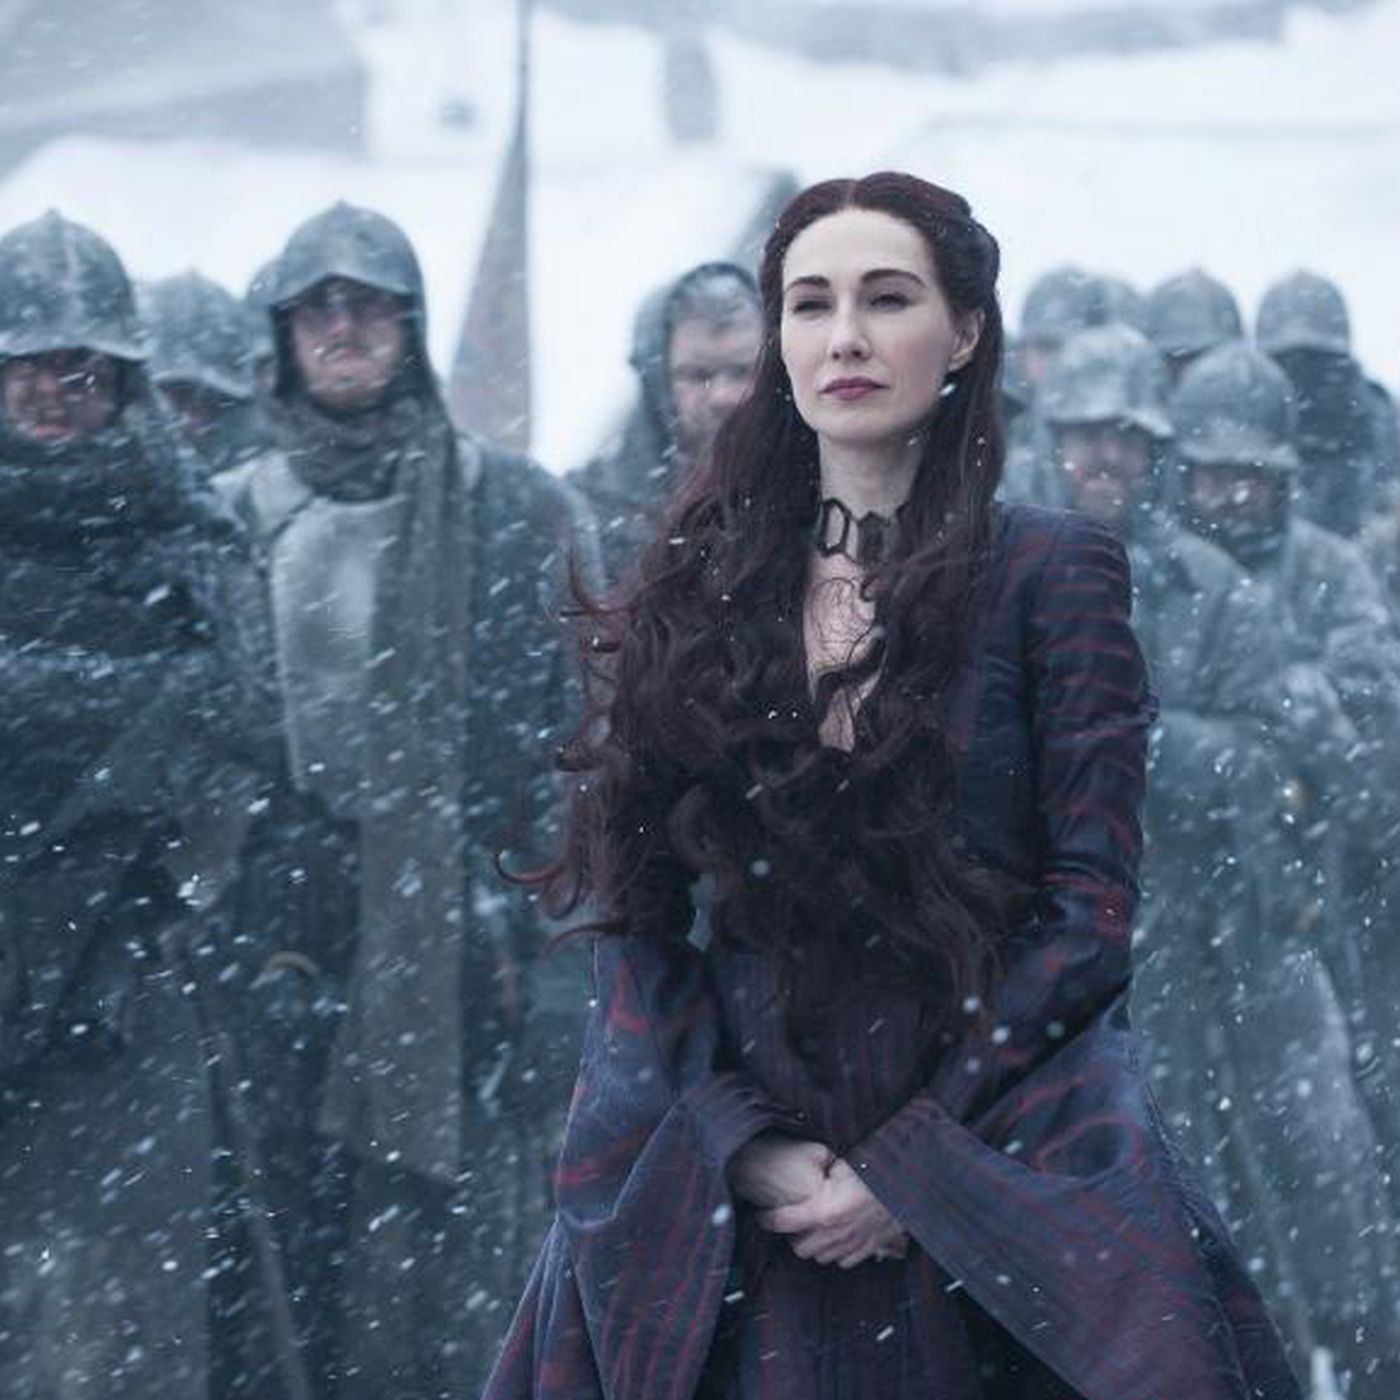 Game of Thrones: Where has Melisandre been this whole time?